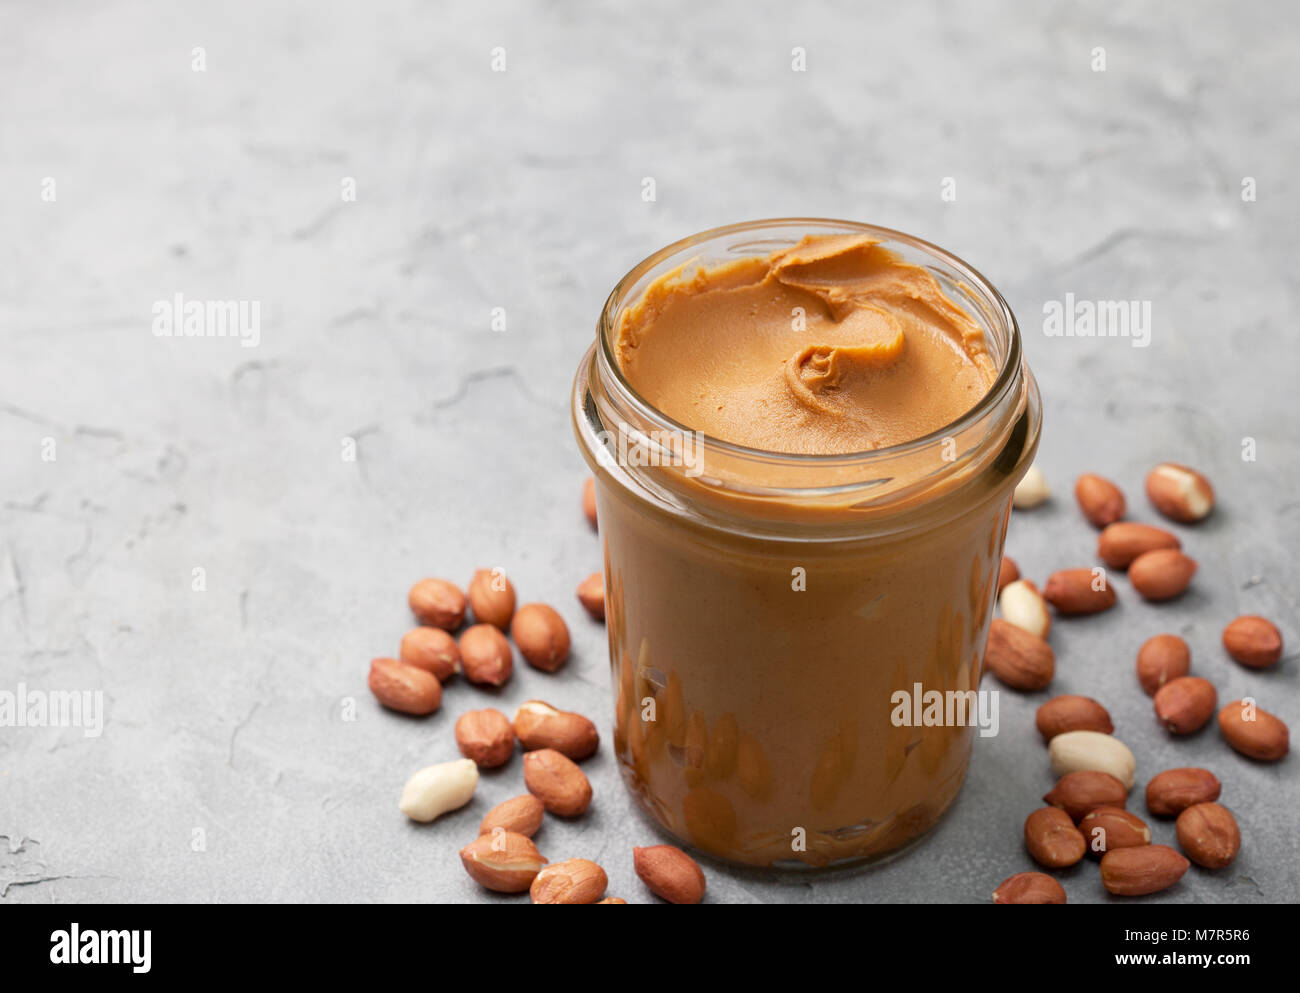 Jar and Knife with Creamy Peanut Butter Stock Image - Image of glass,  object: 115100781